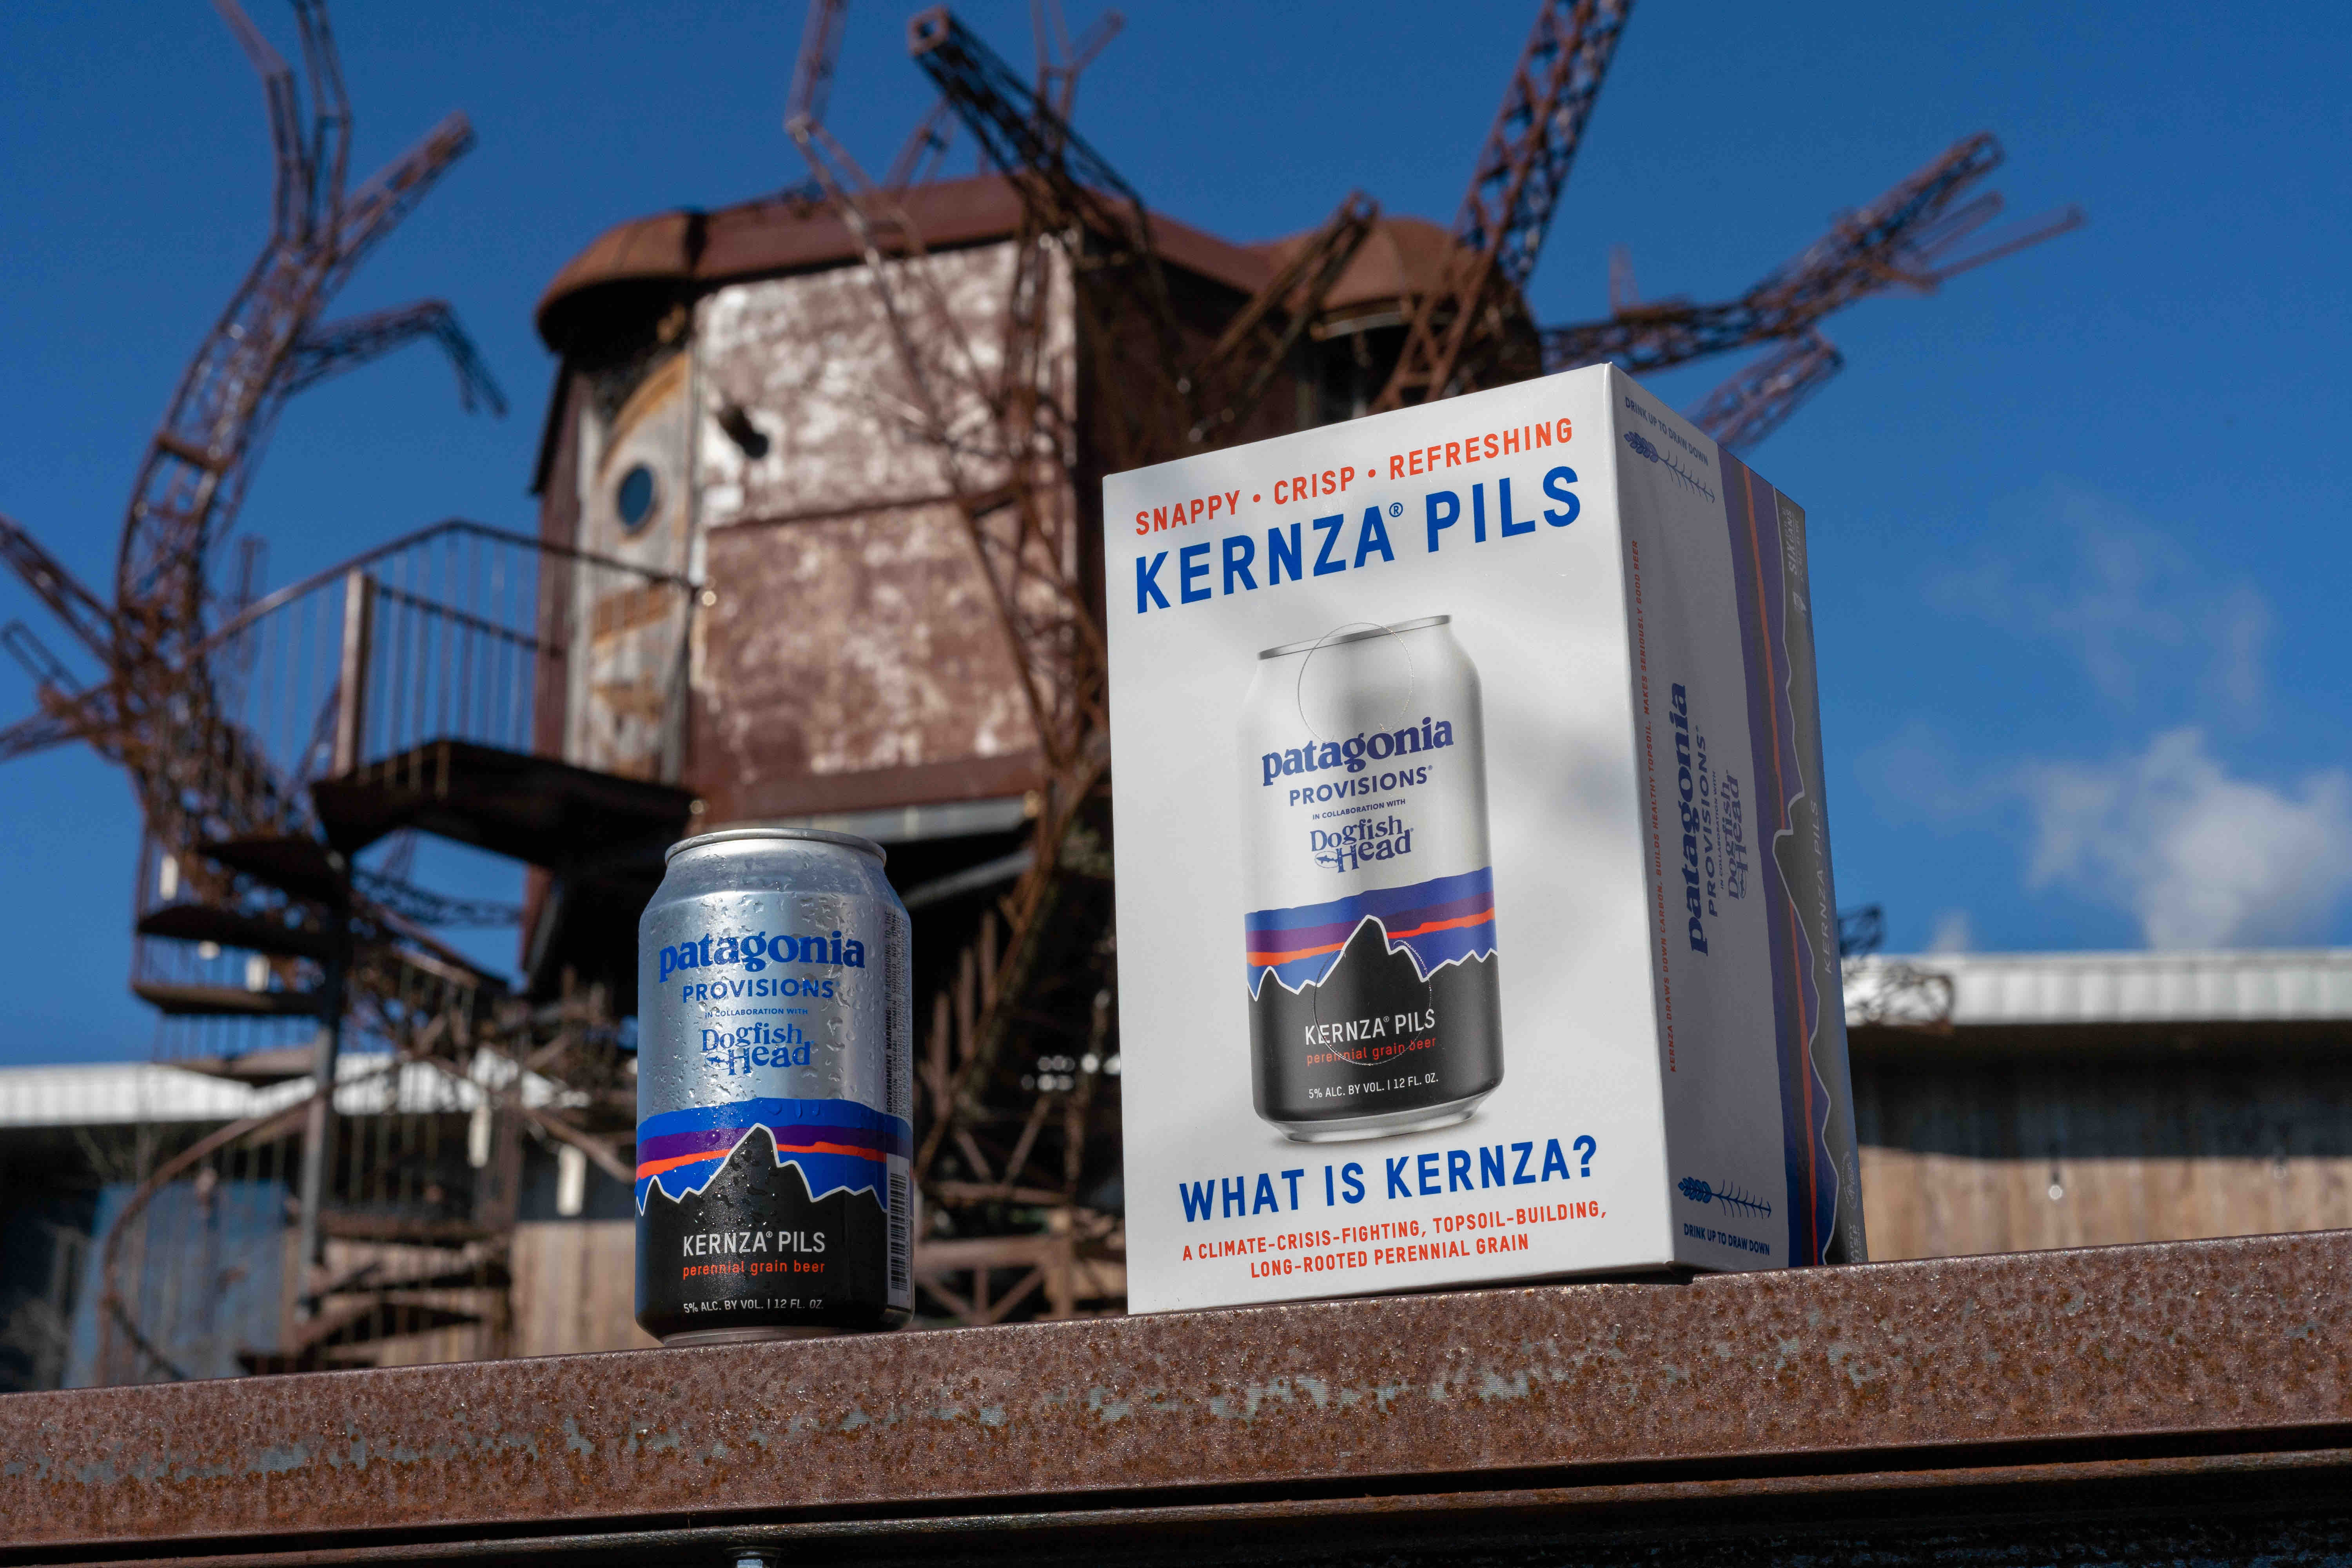 Patagonia Provisions and Dogfish Head Craft Brewery Kernza Pils. (image courtesy of Dogfish Head Craft Brewery)